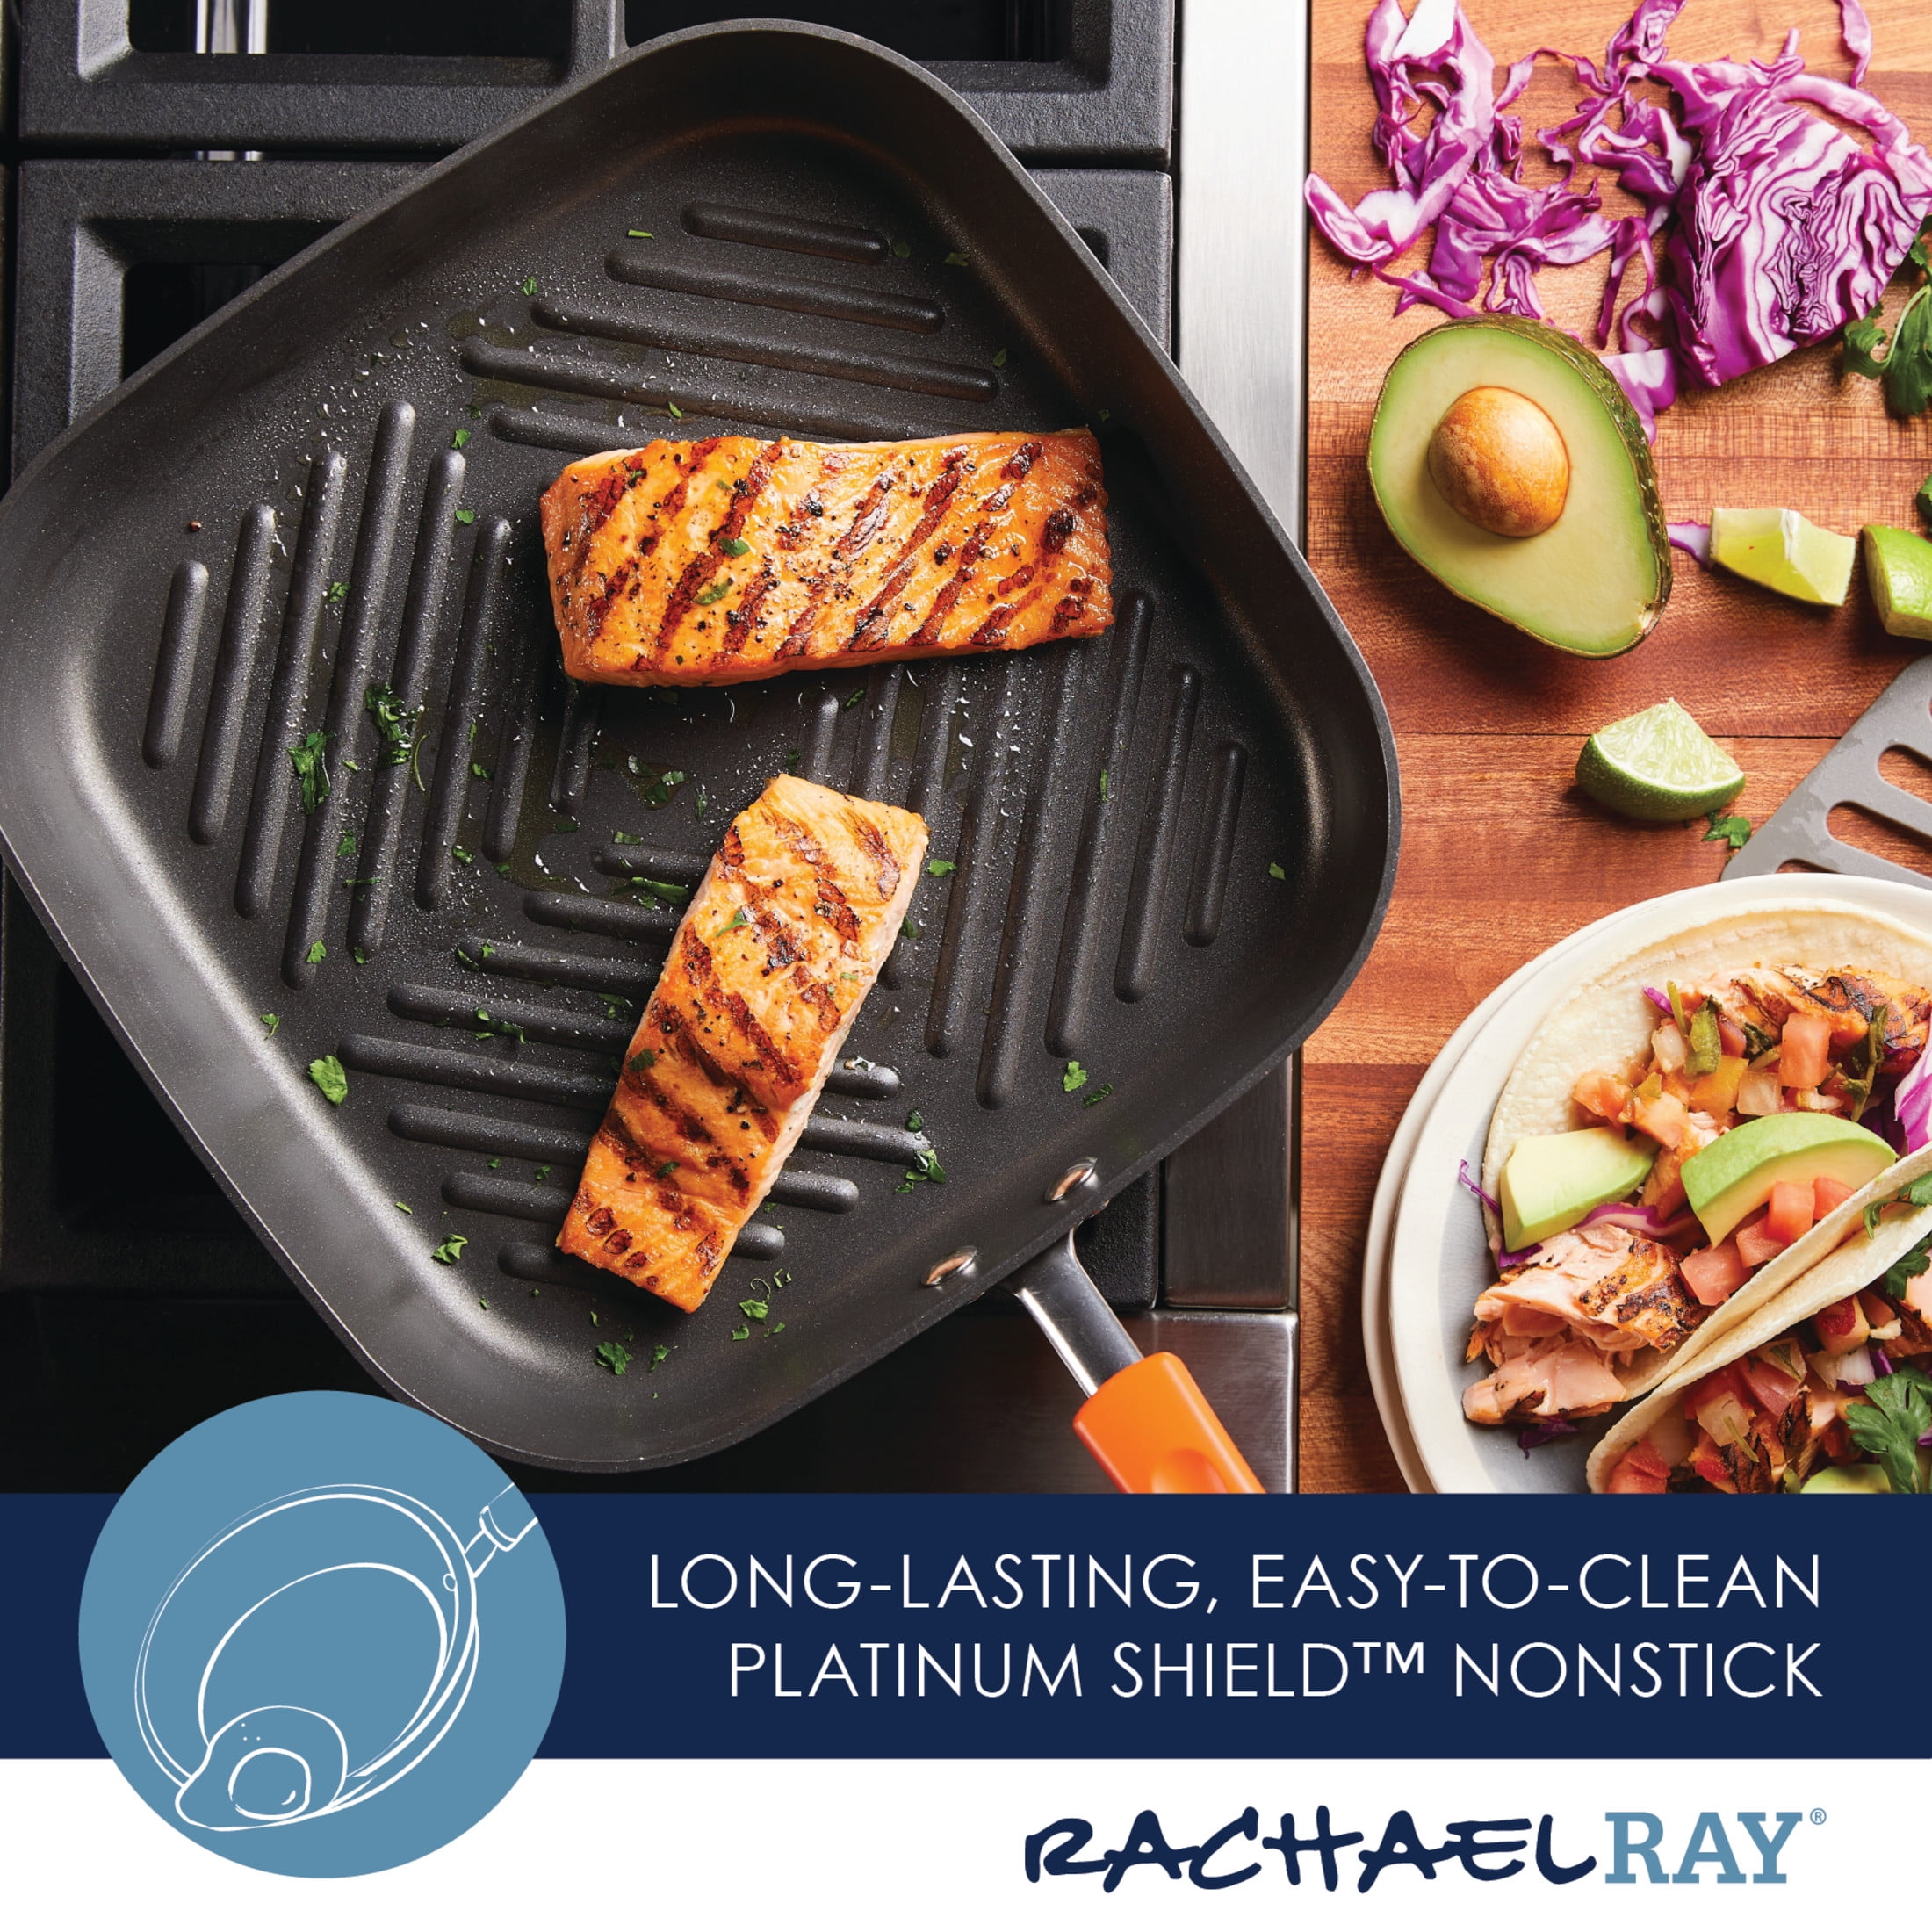 Lowest Price* Rachael Ray Hard Anodized Nonstick 15-Inch Oval Grill Pan for  $28.99 Shipped! (reg. $39.99)